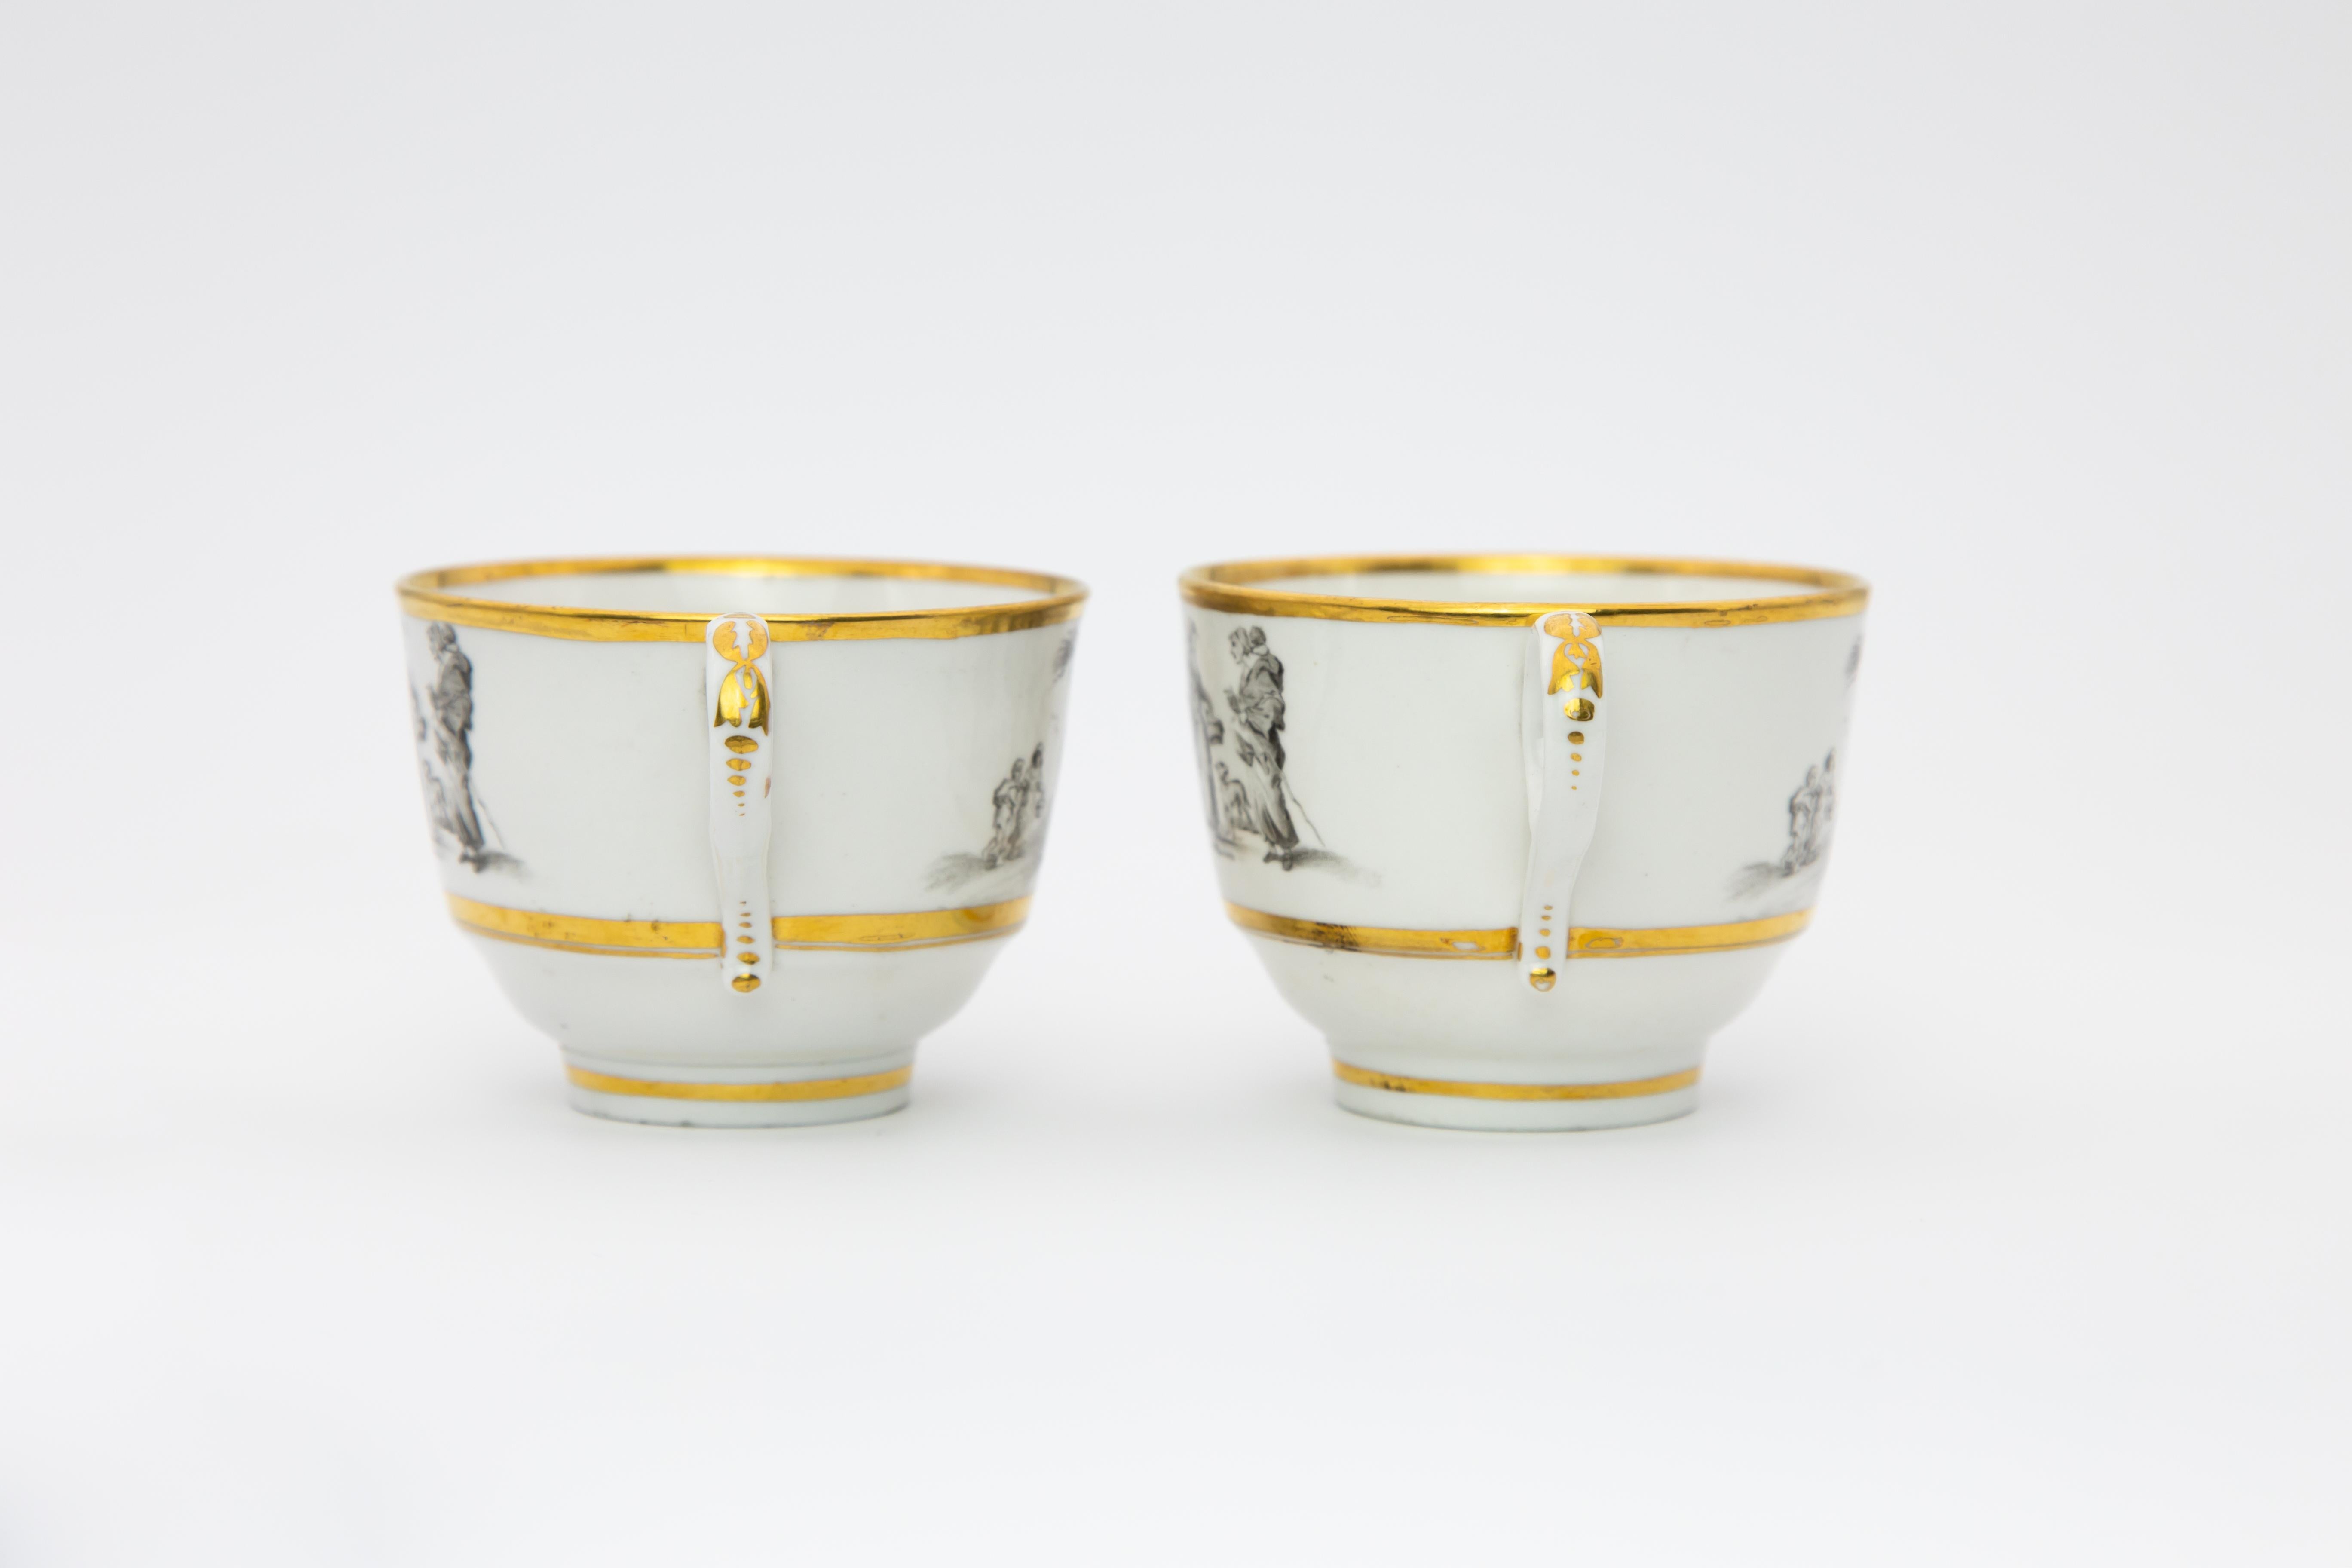 Pair of Early Barr Flight Barr Porcelain Teacups and Saucers For Sale 1